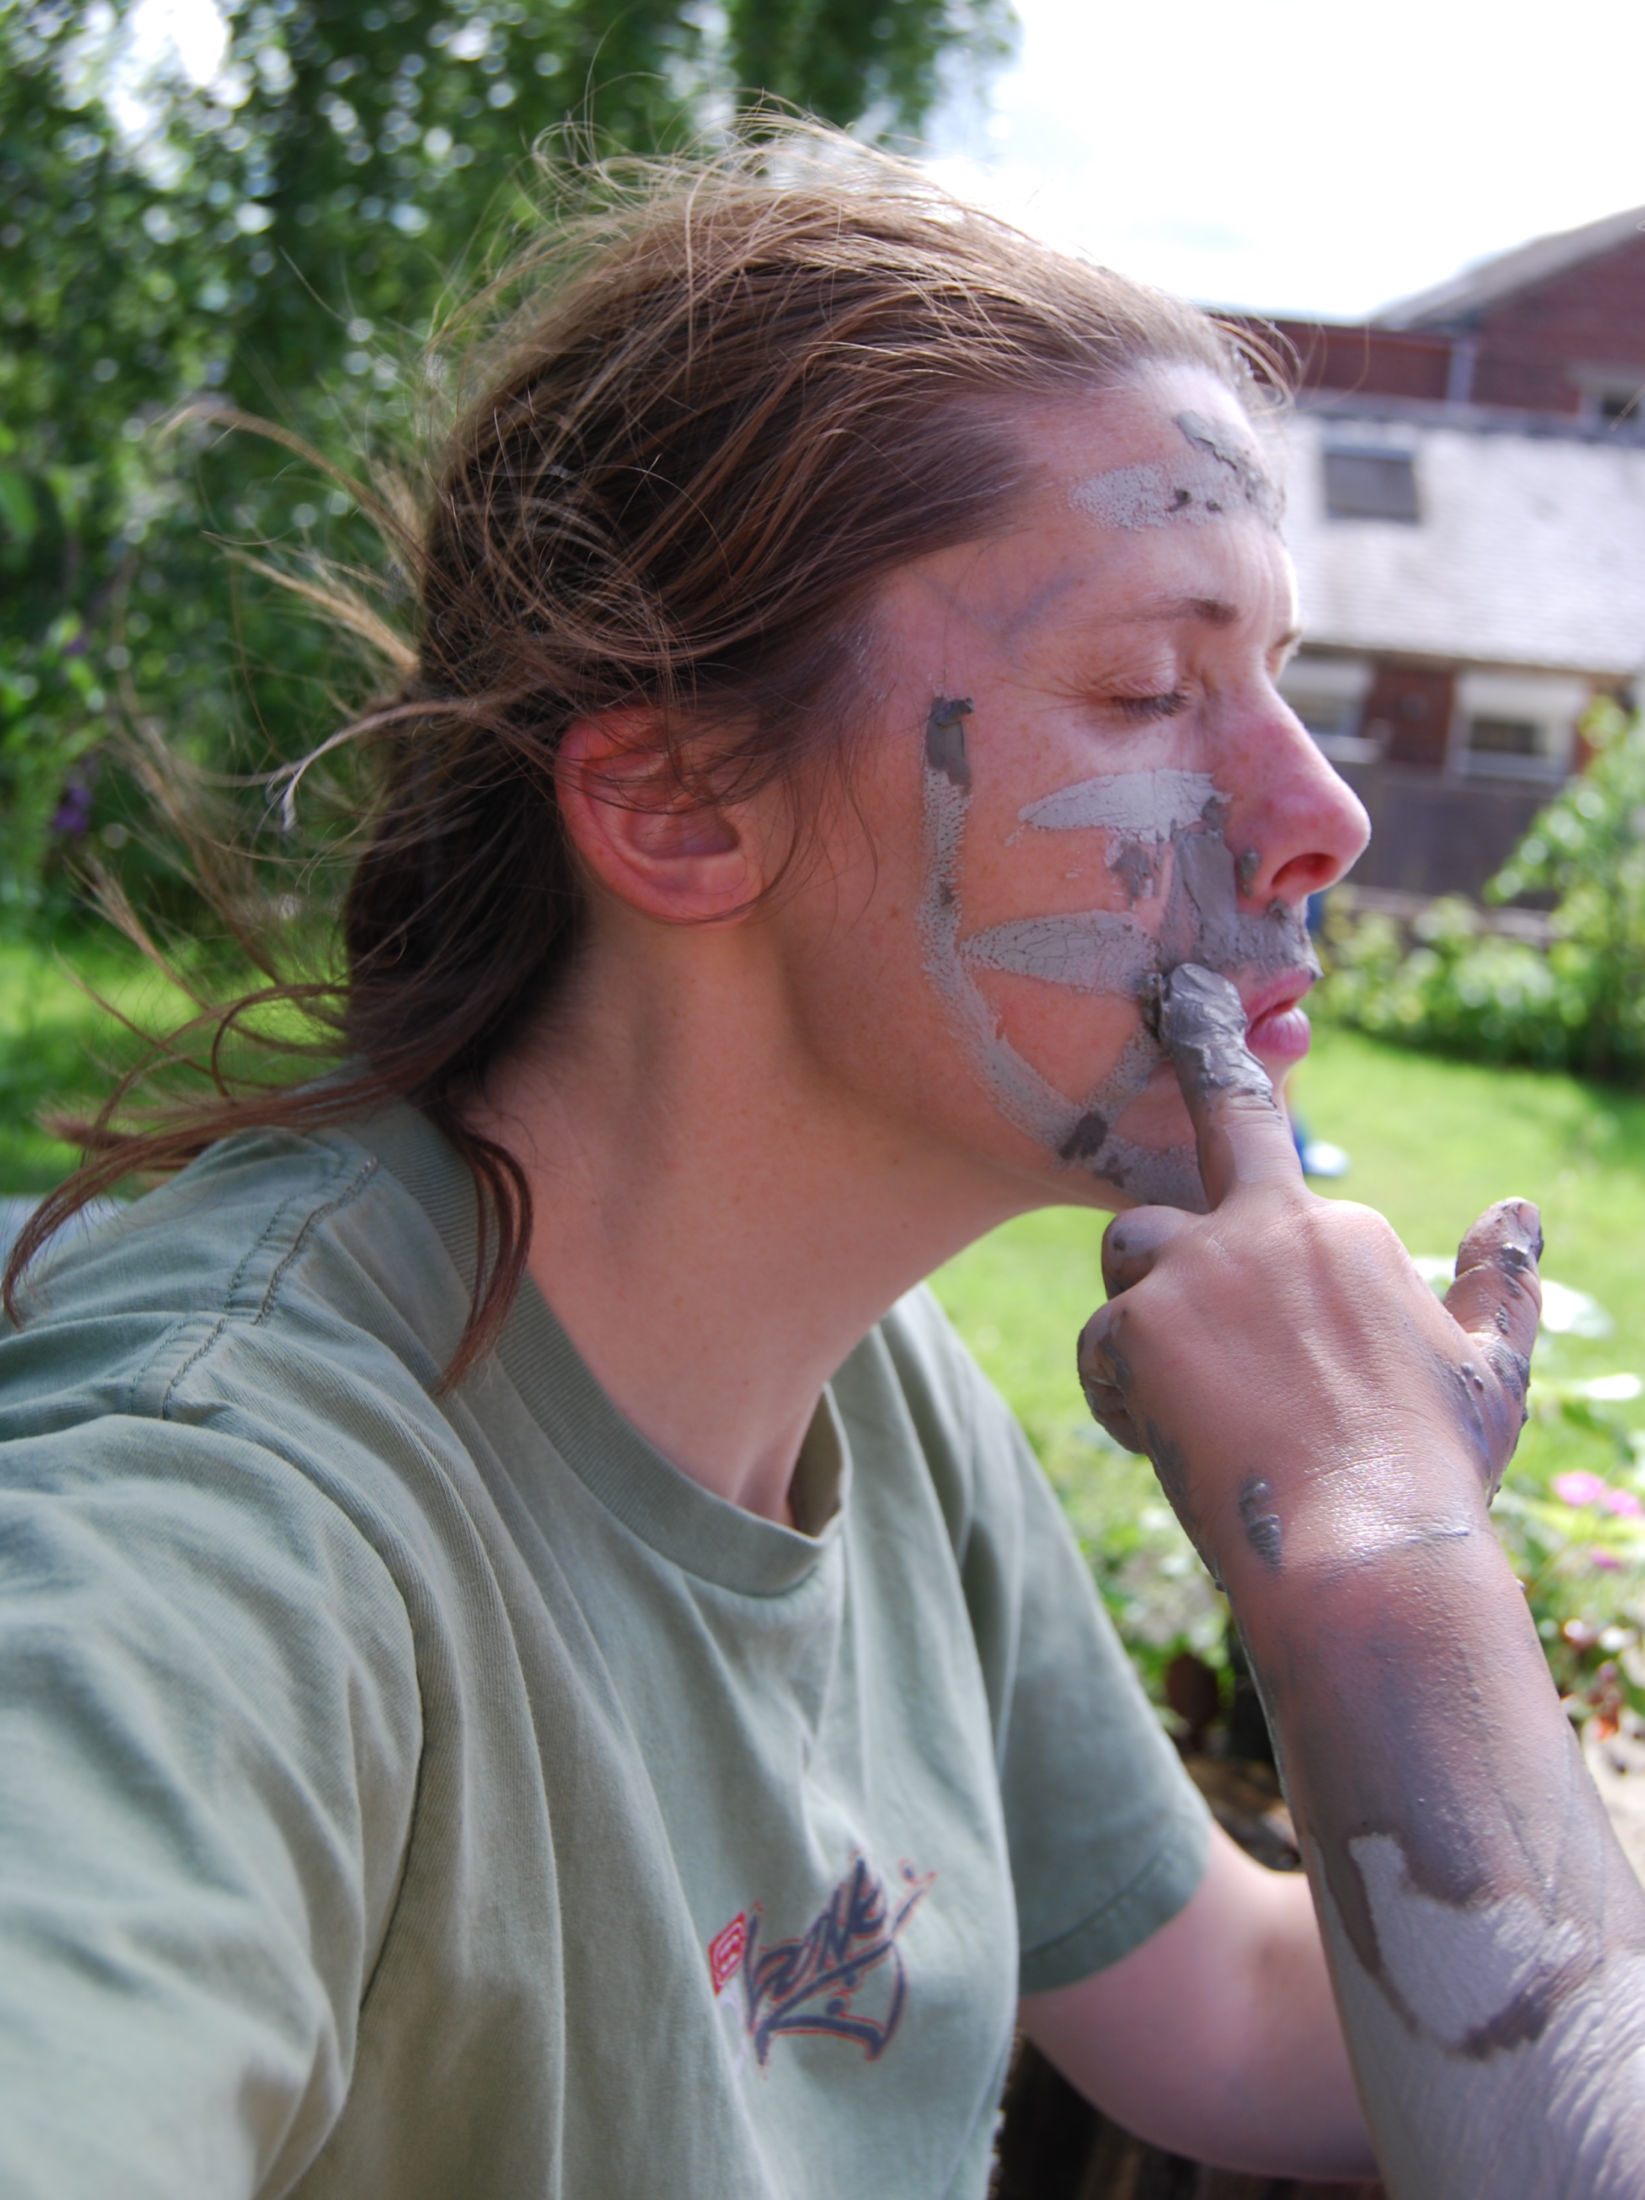 woman having her face painted in mud by a pair of small muddy hands